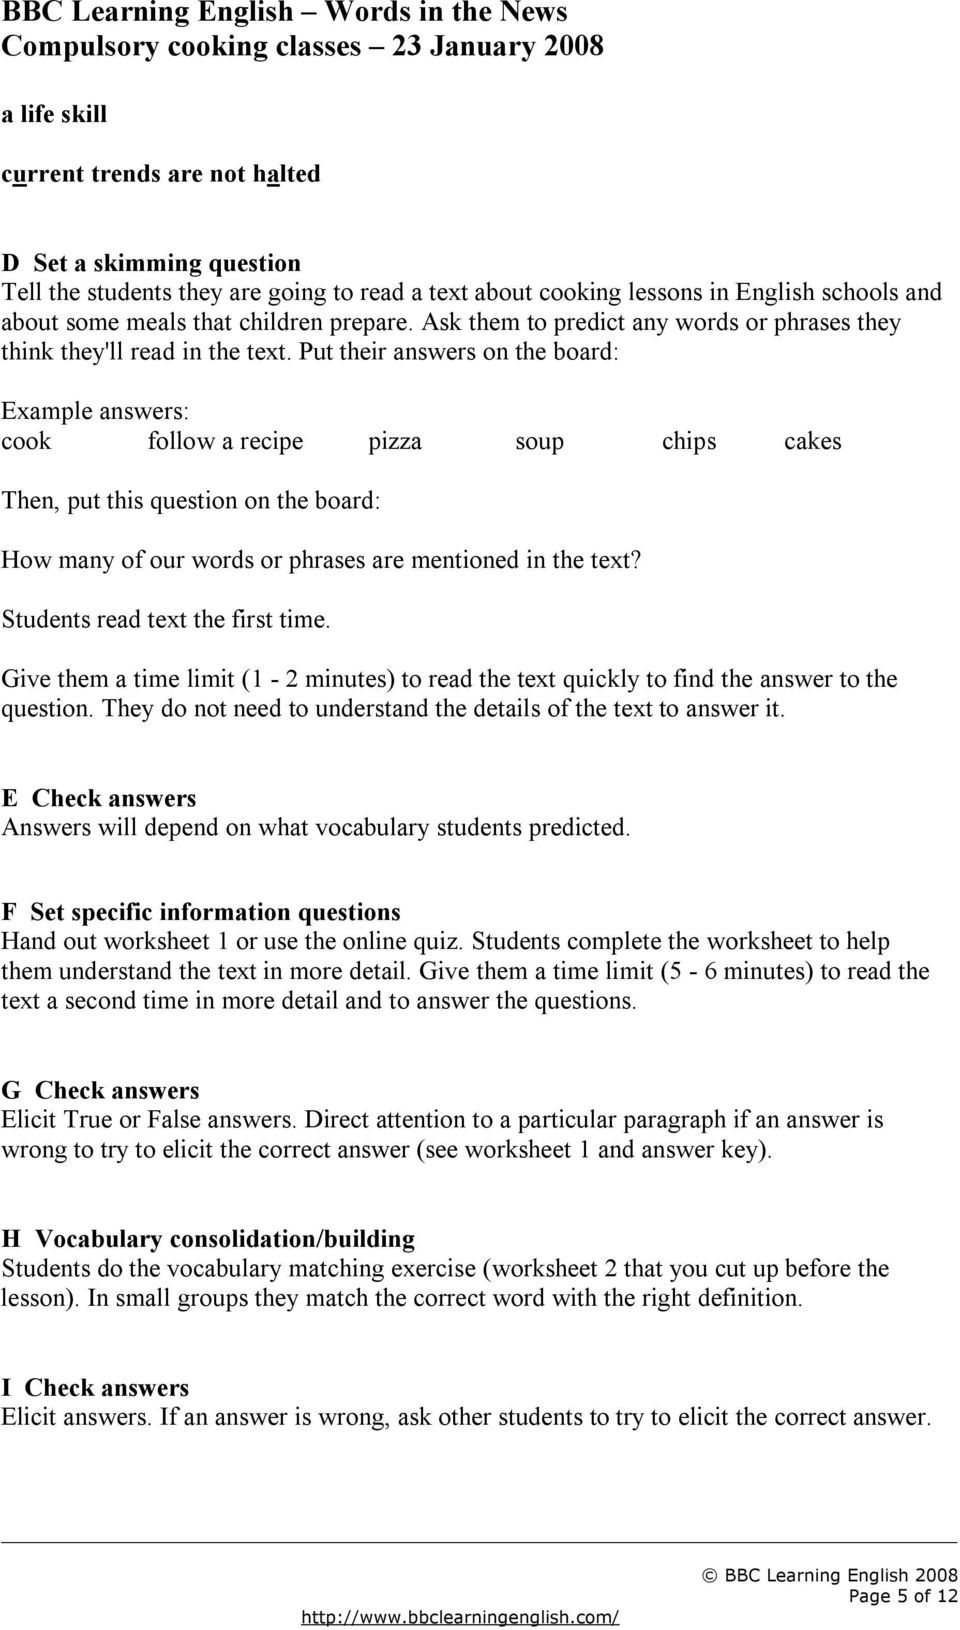 Basic Cooking Terms Worksheet Answers Words In the News Teacher S Pack Lesson Plan and Student